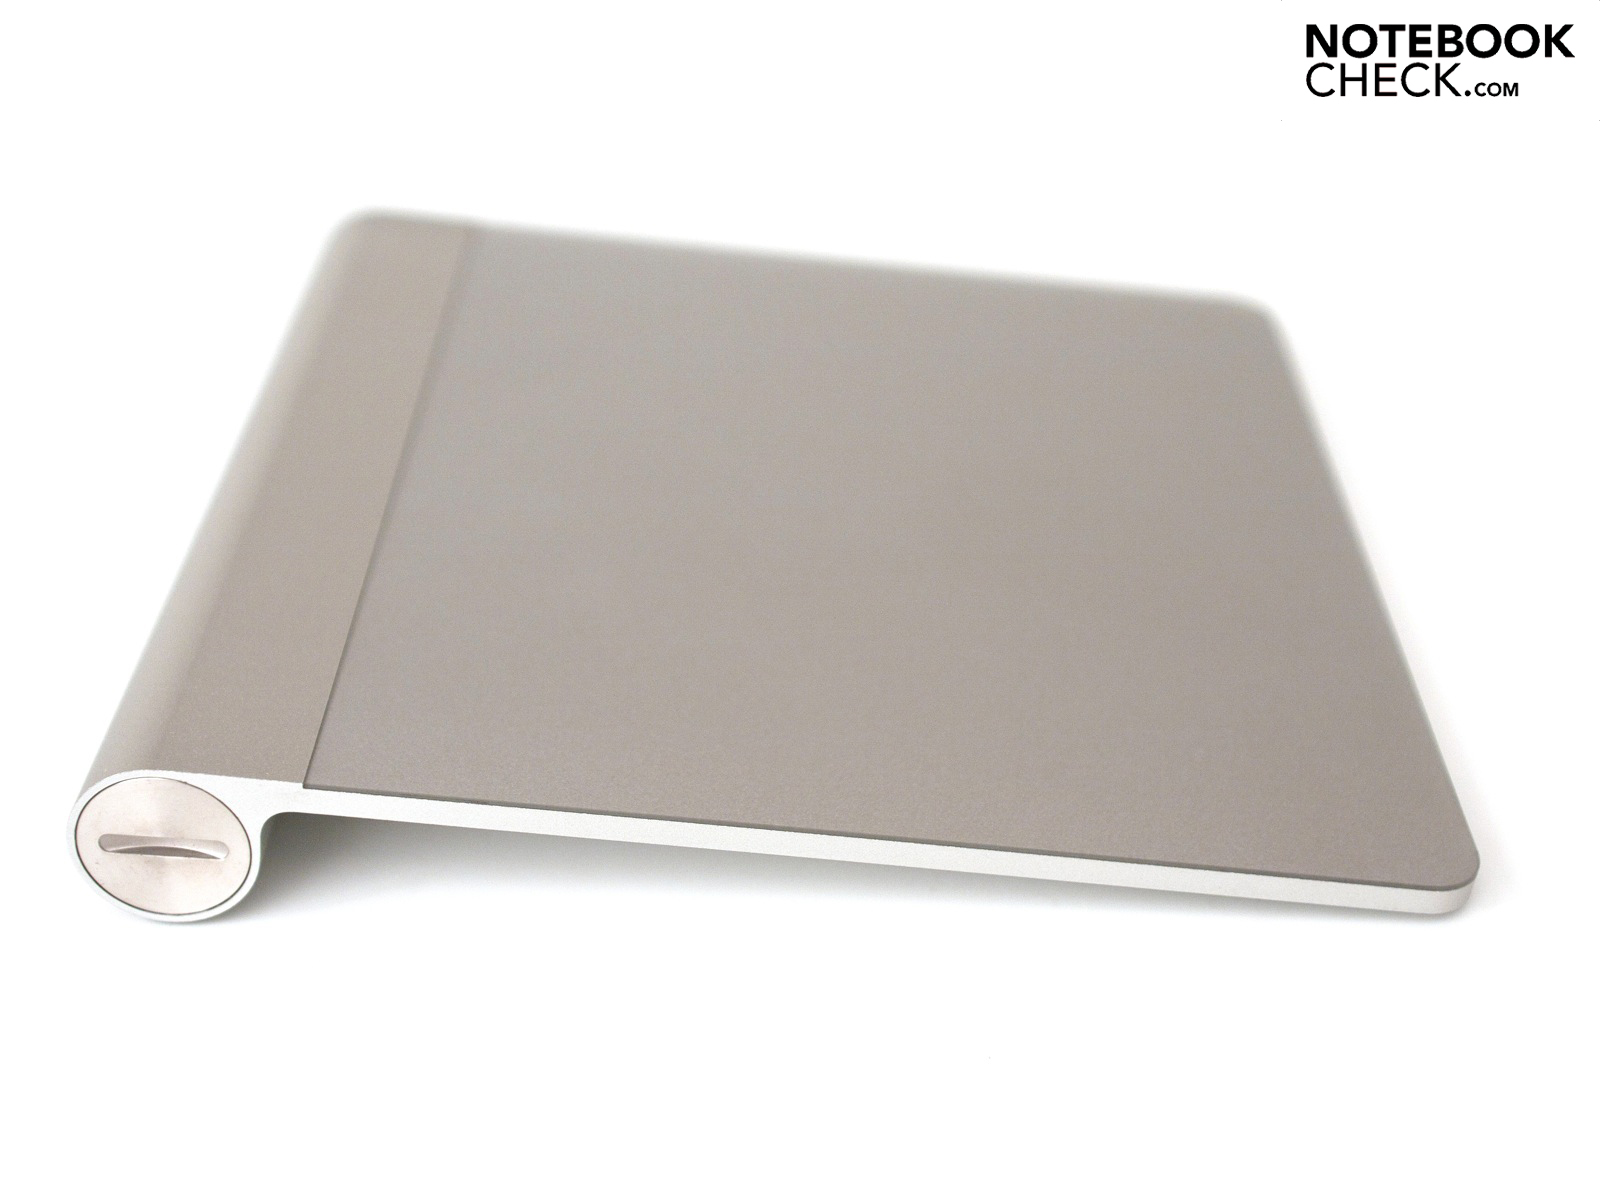 Apple magic trackpad the beginning of the end for macbook pro